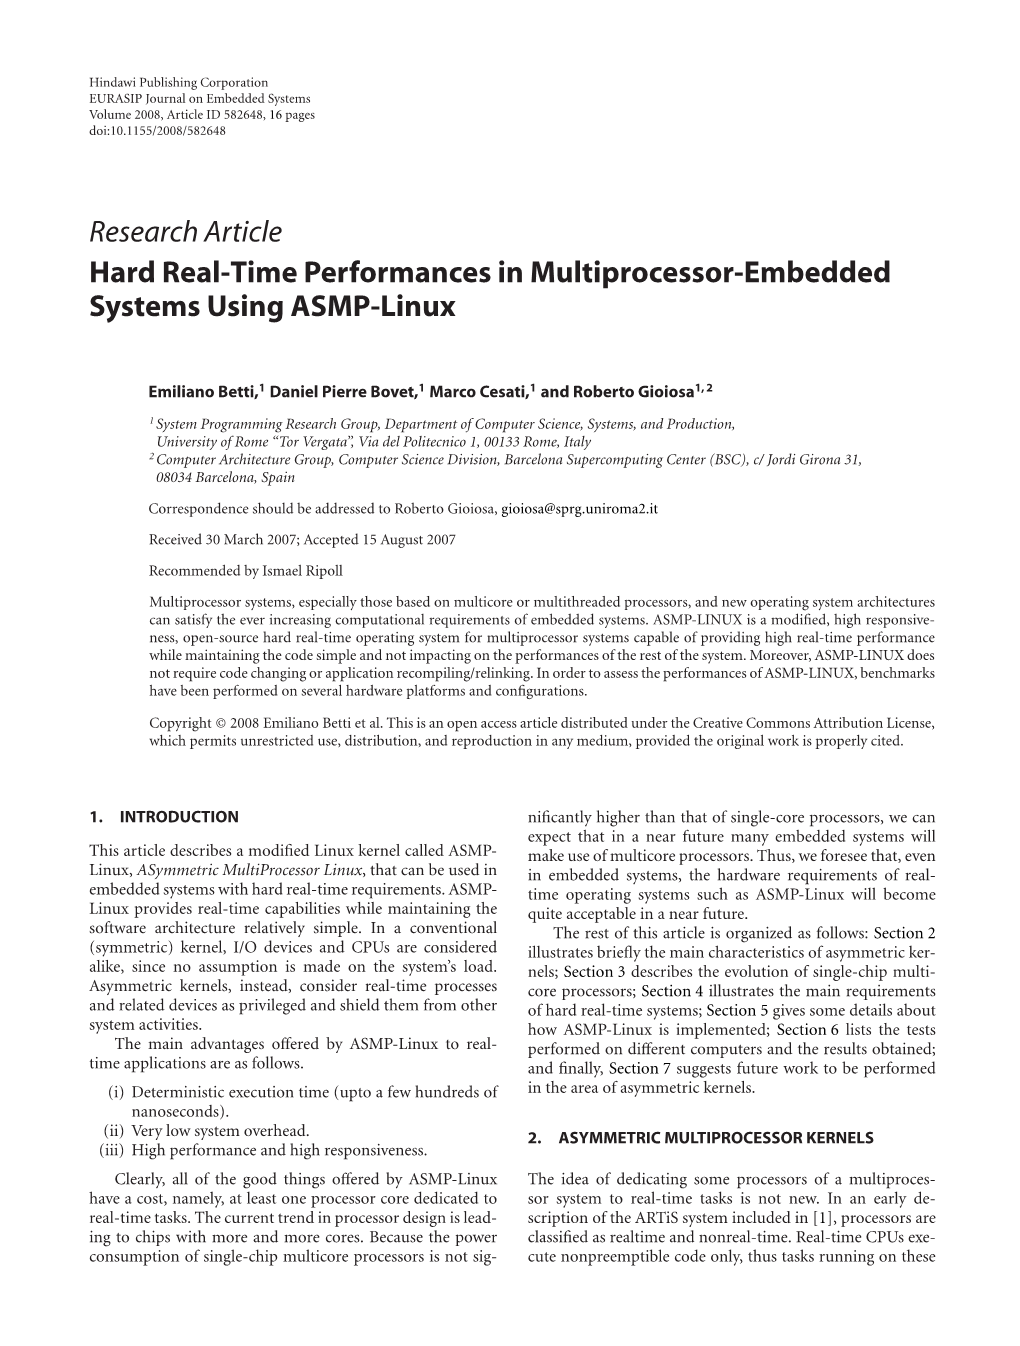 Hard Real-Time Performances in Multiprocessor-Embedded Systems Using ASMP-Linux